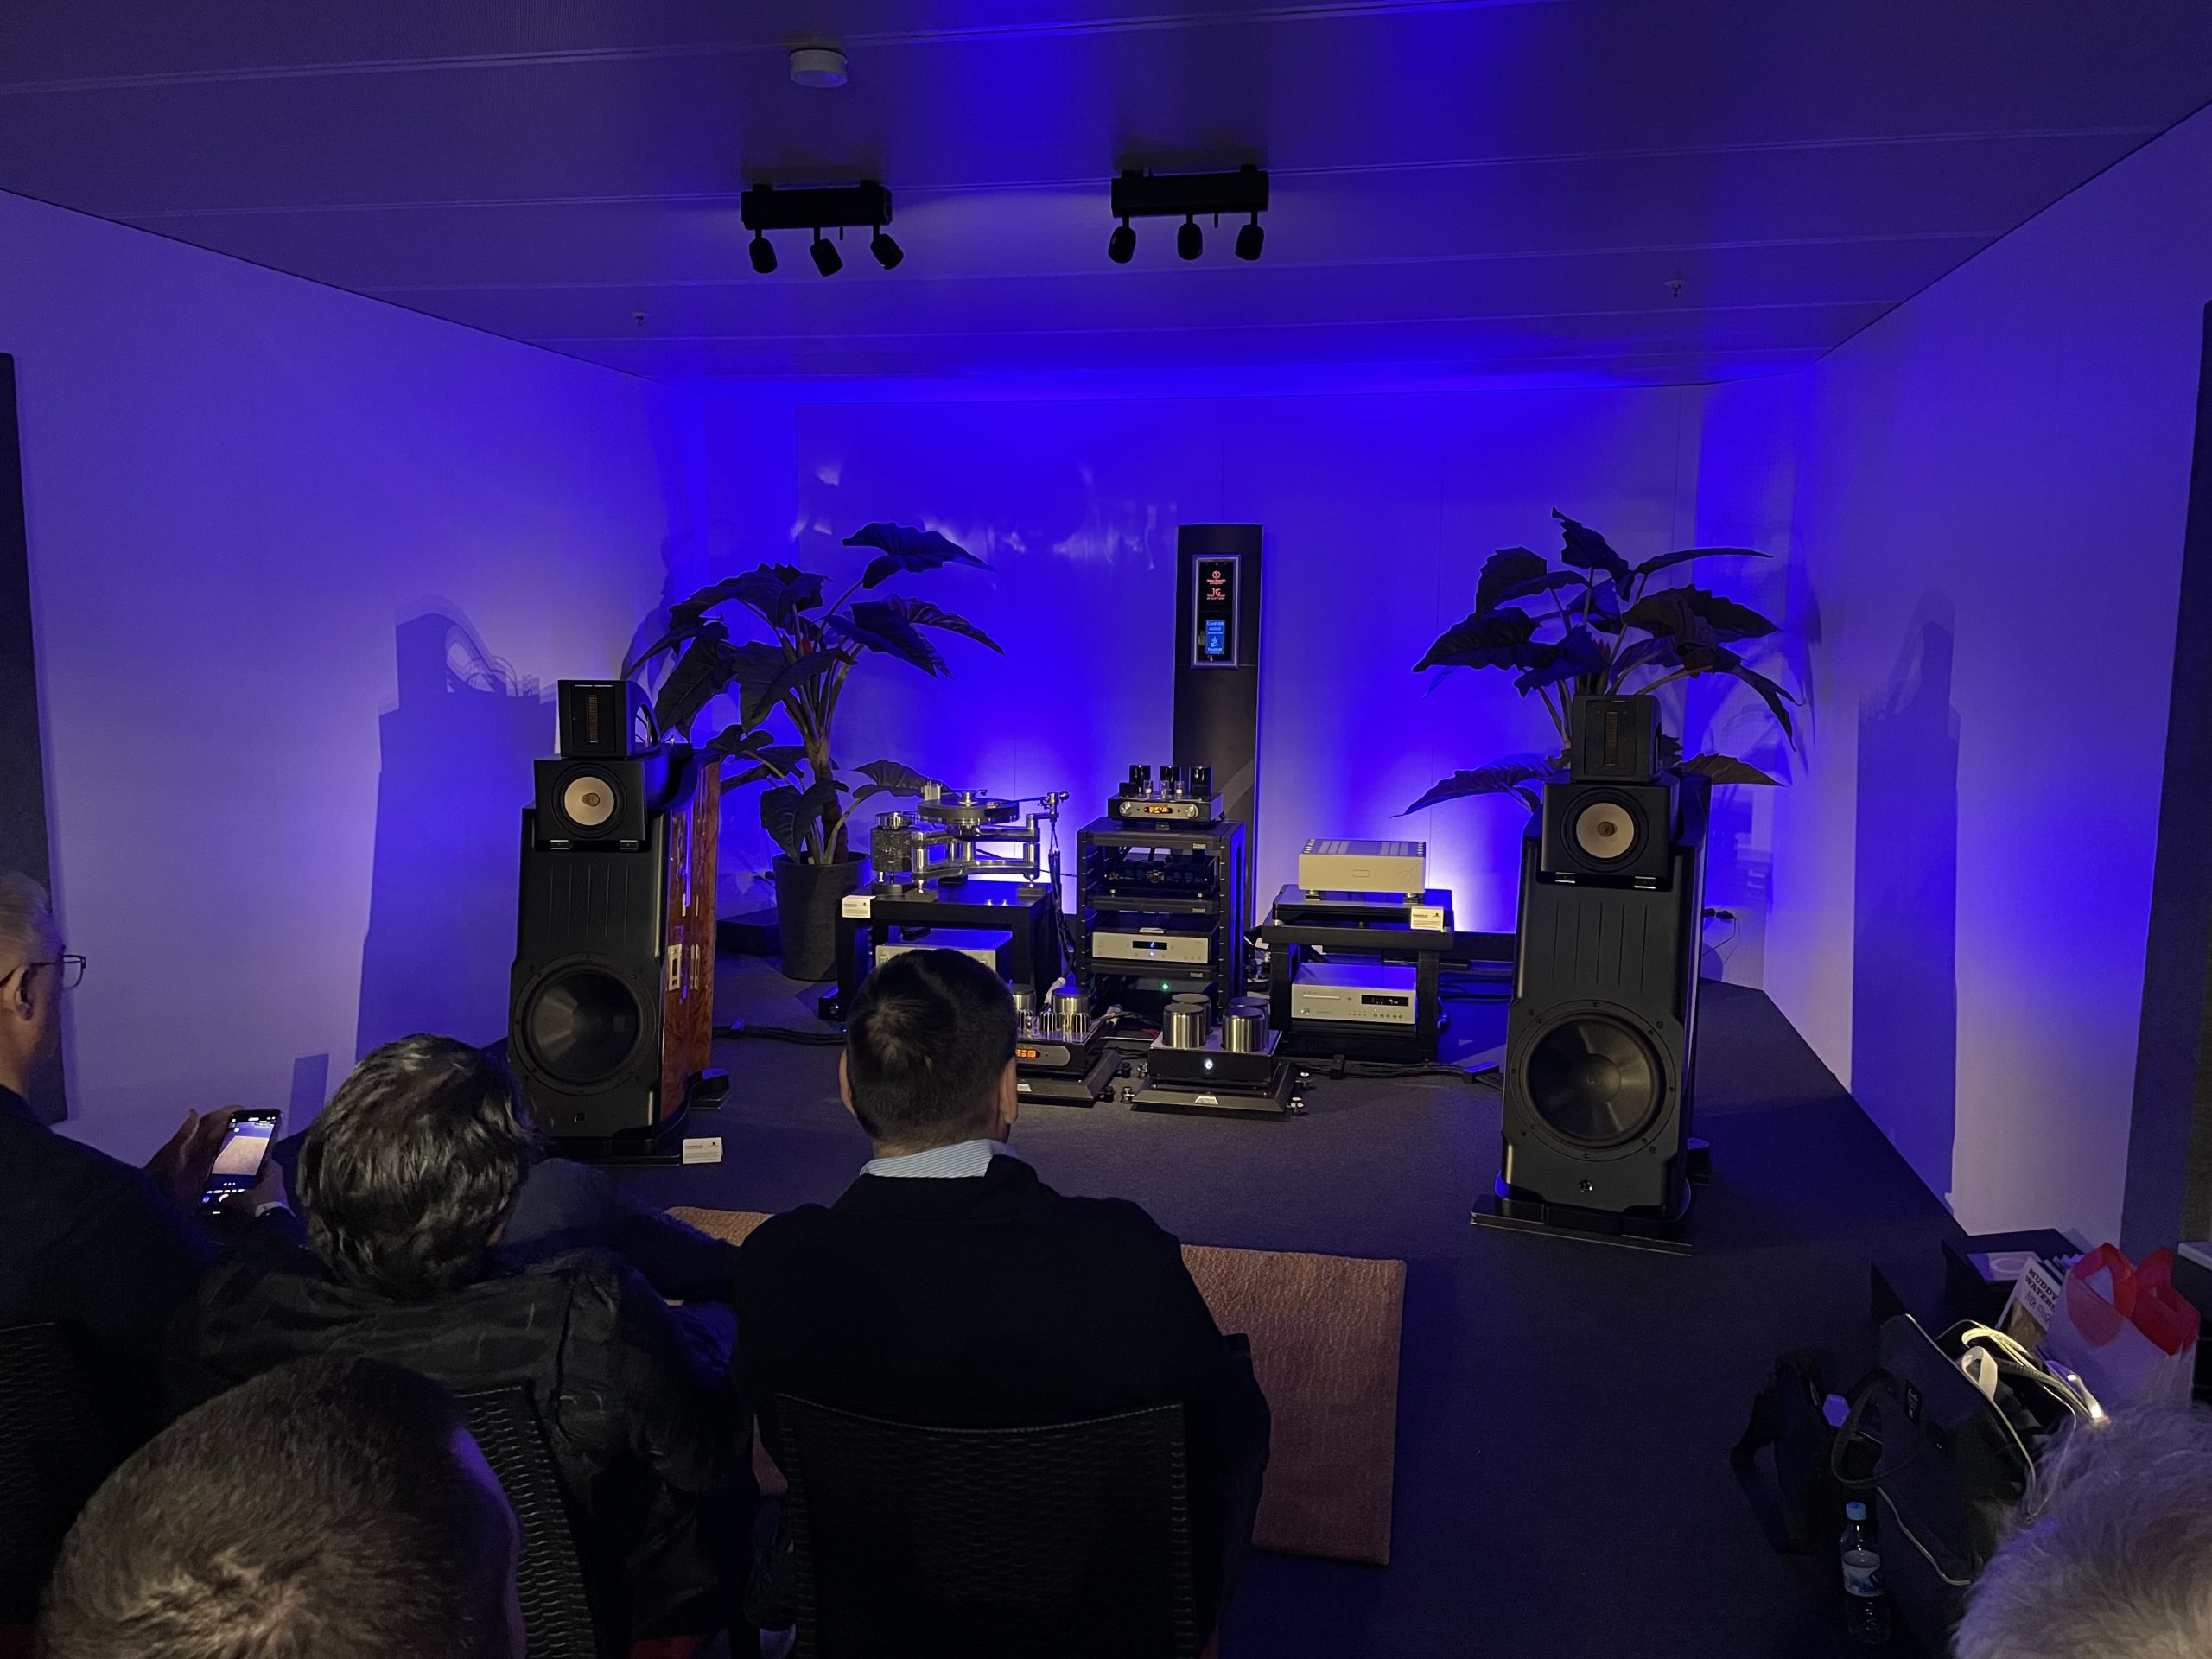 Contemplations On the Current State of High-End Audio Trade Shows